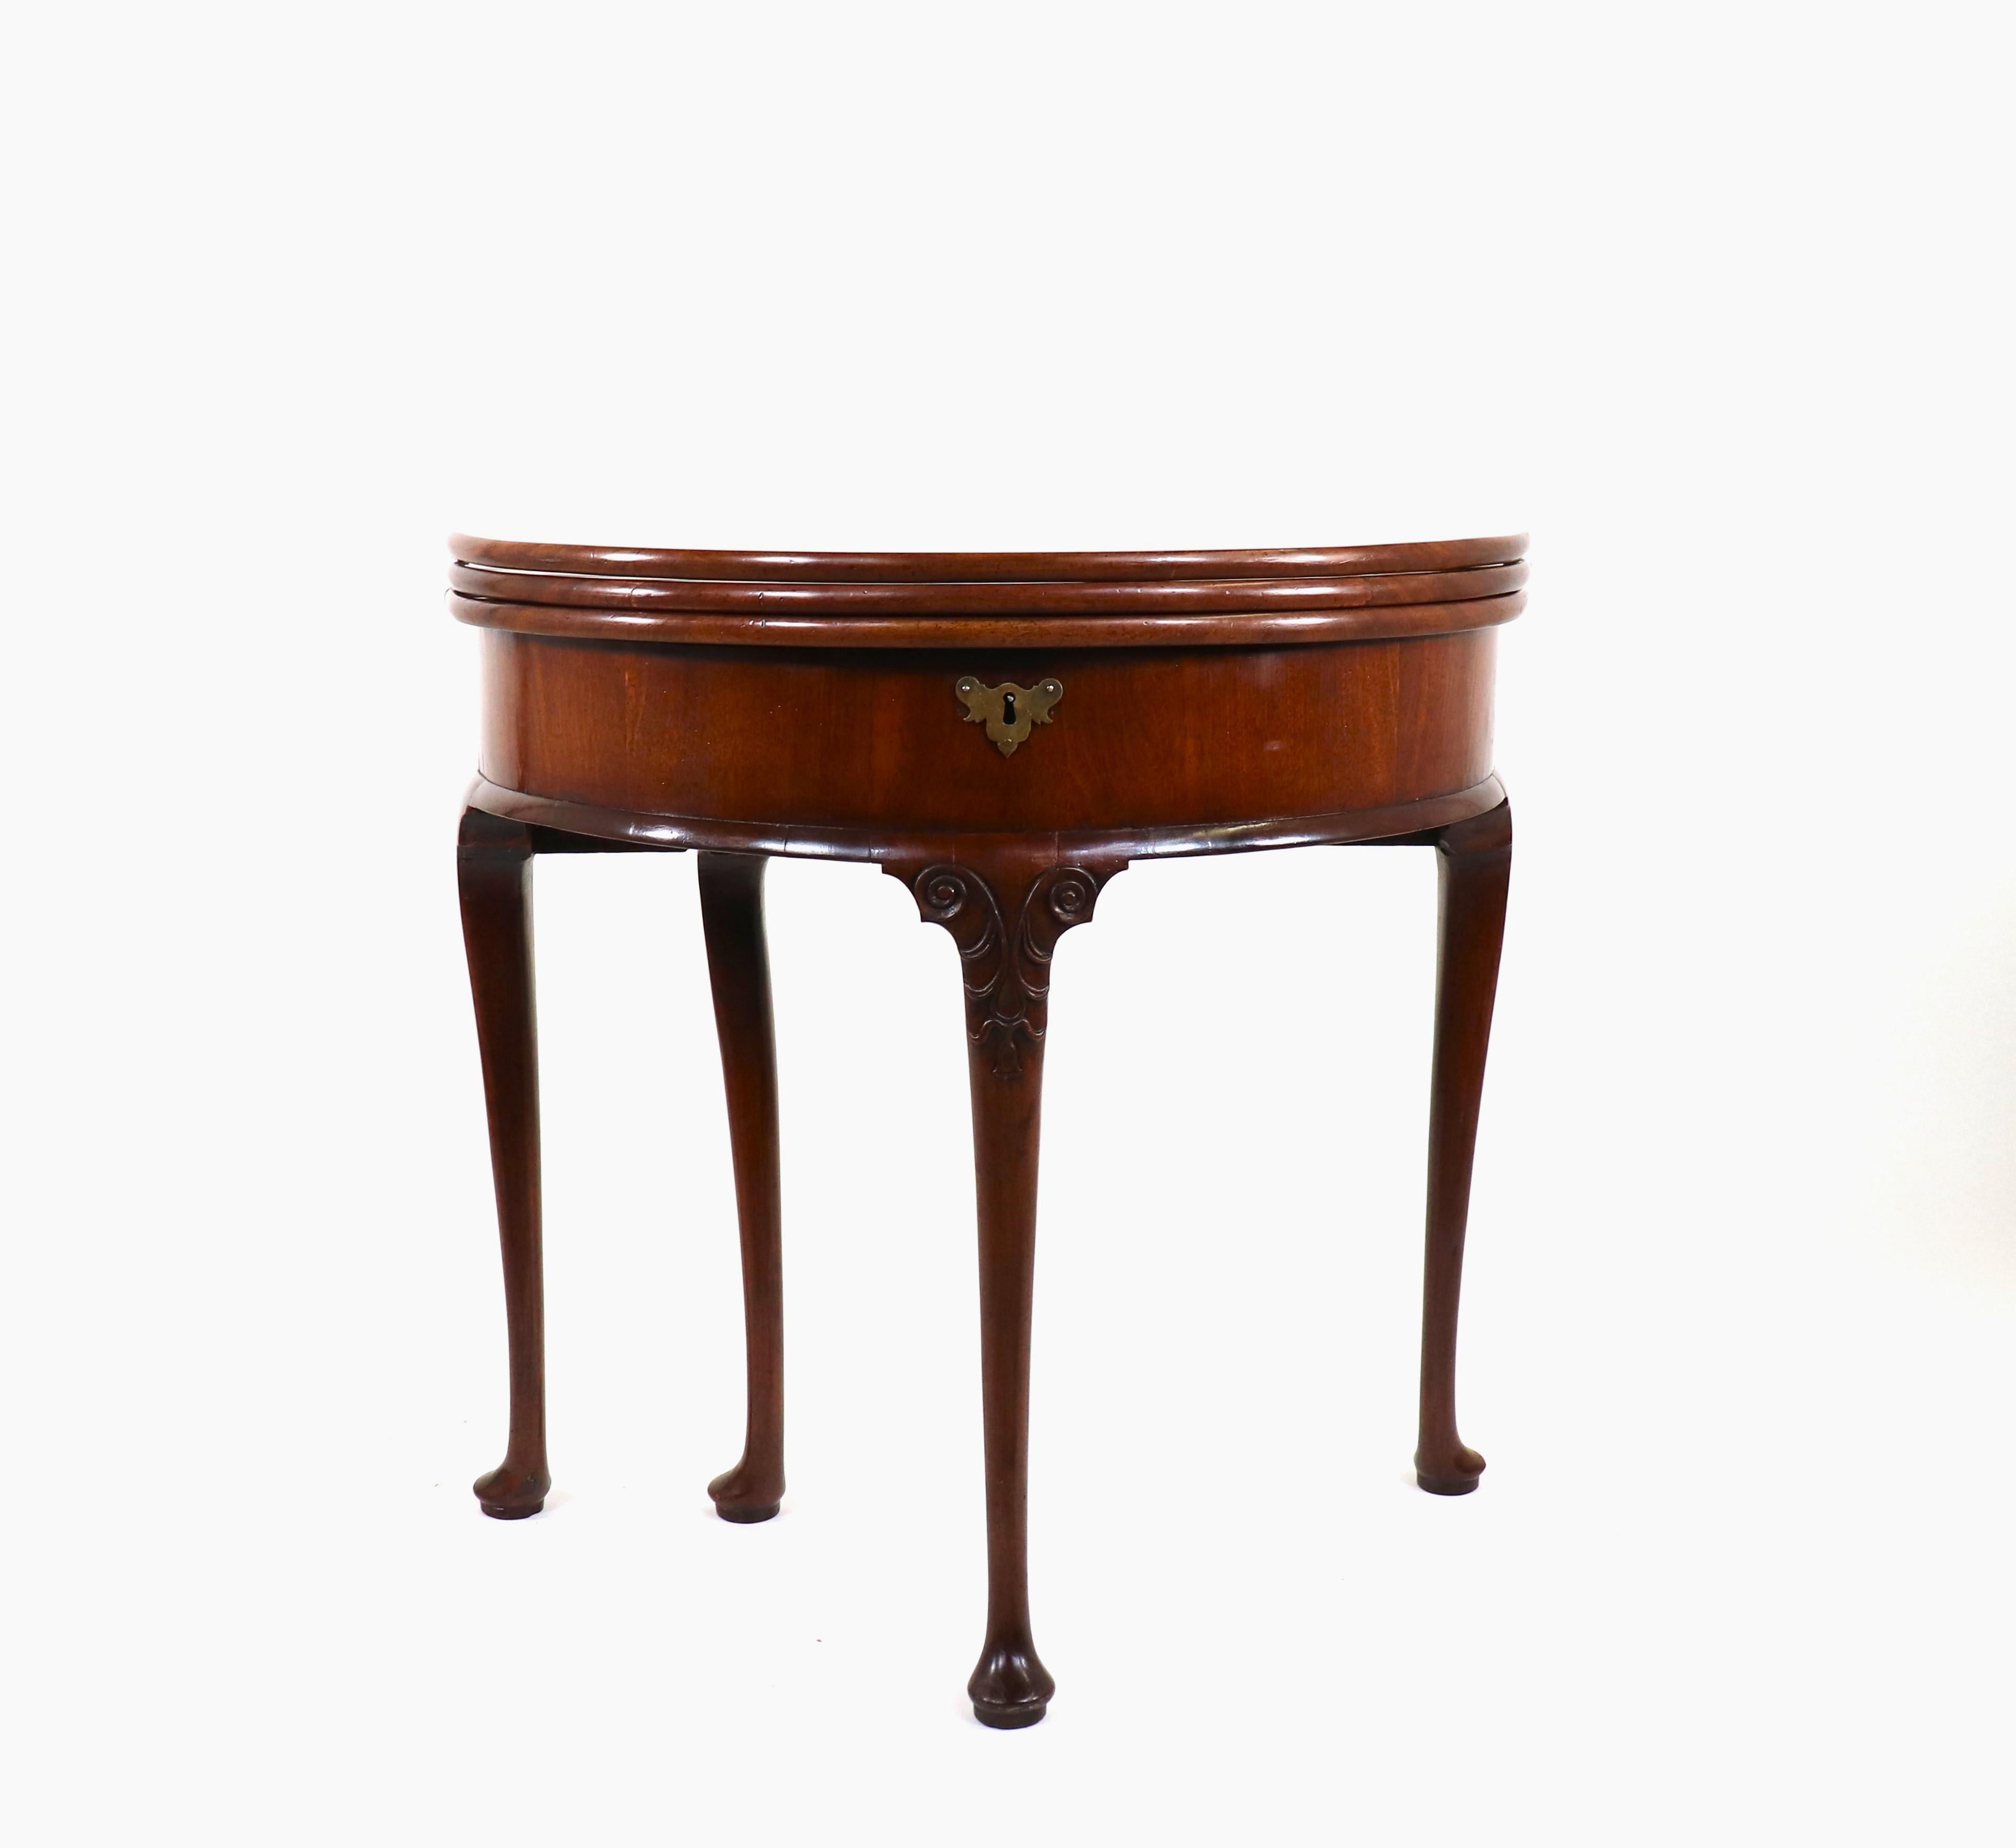 The George III style produced exceptional quality pieces that many collectors have deemed the finest examples of furniture design. During this time Georgian furniture makers preferred mahogany over walnut, making it the main wood of choice. This